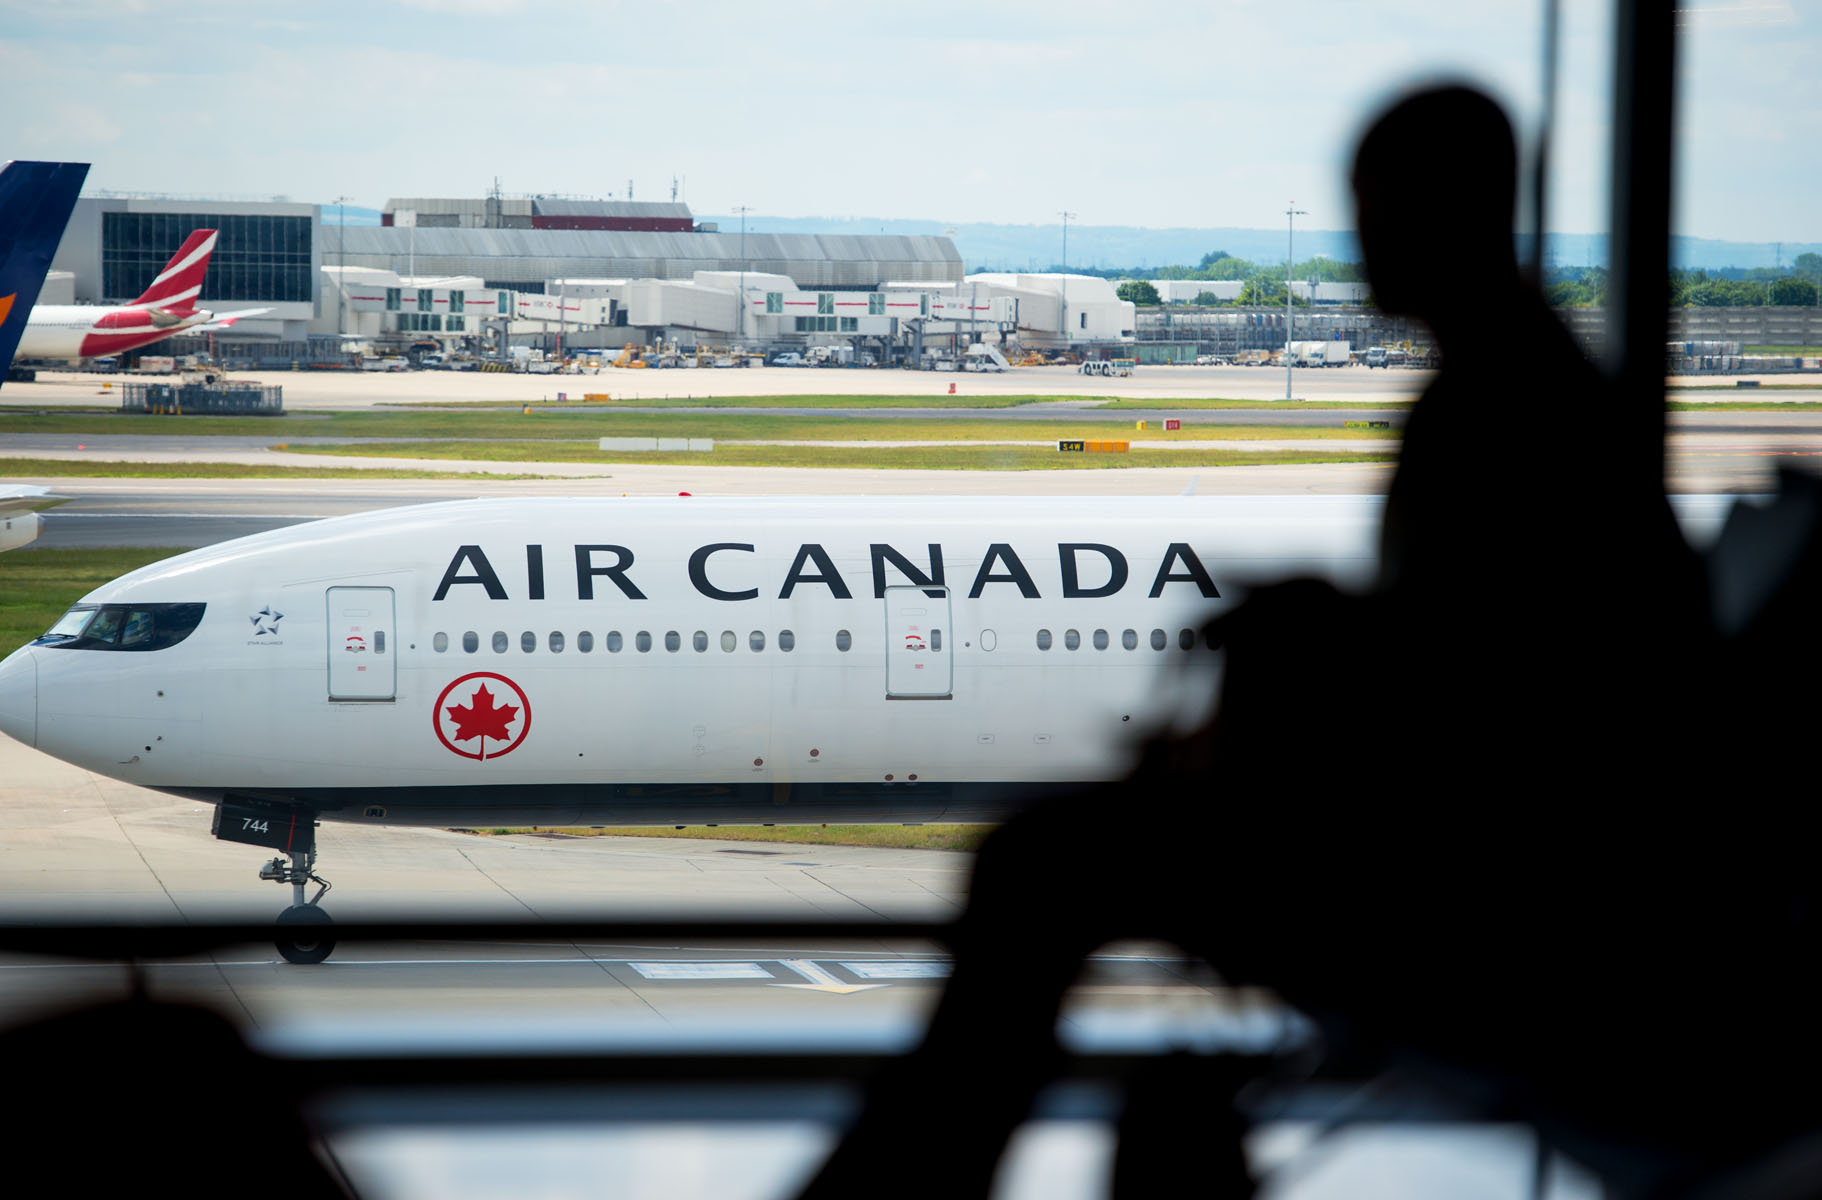 Heathrow, T2A, airside, passenger silhouetted, Air Canada aircraft taxiing in background, May 2019. Photo Credit: Air Canada.